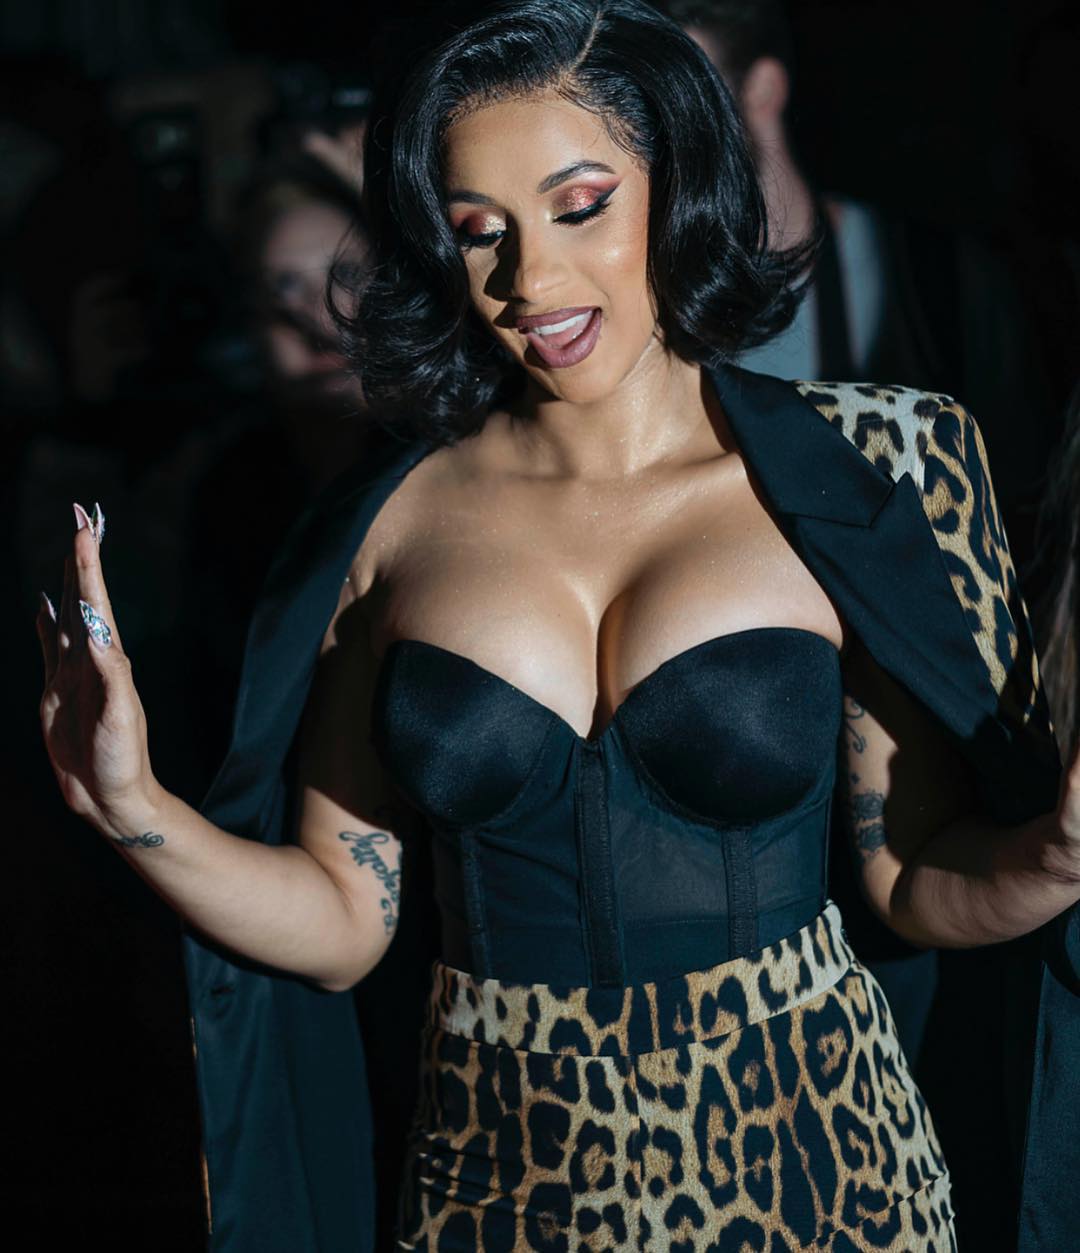 Cardi B reveals she's getting new Breast Implants following her